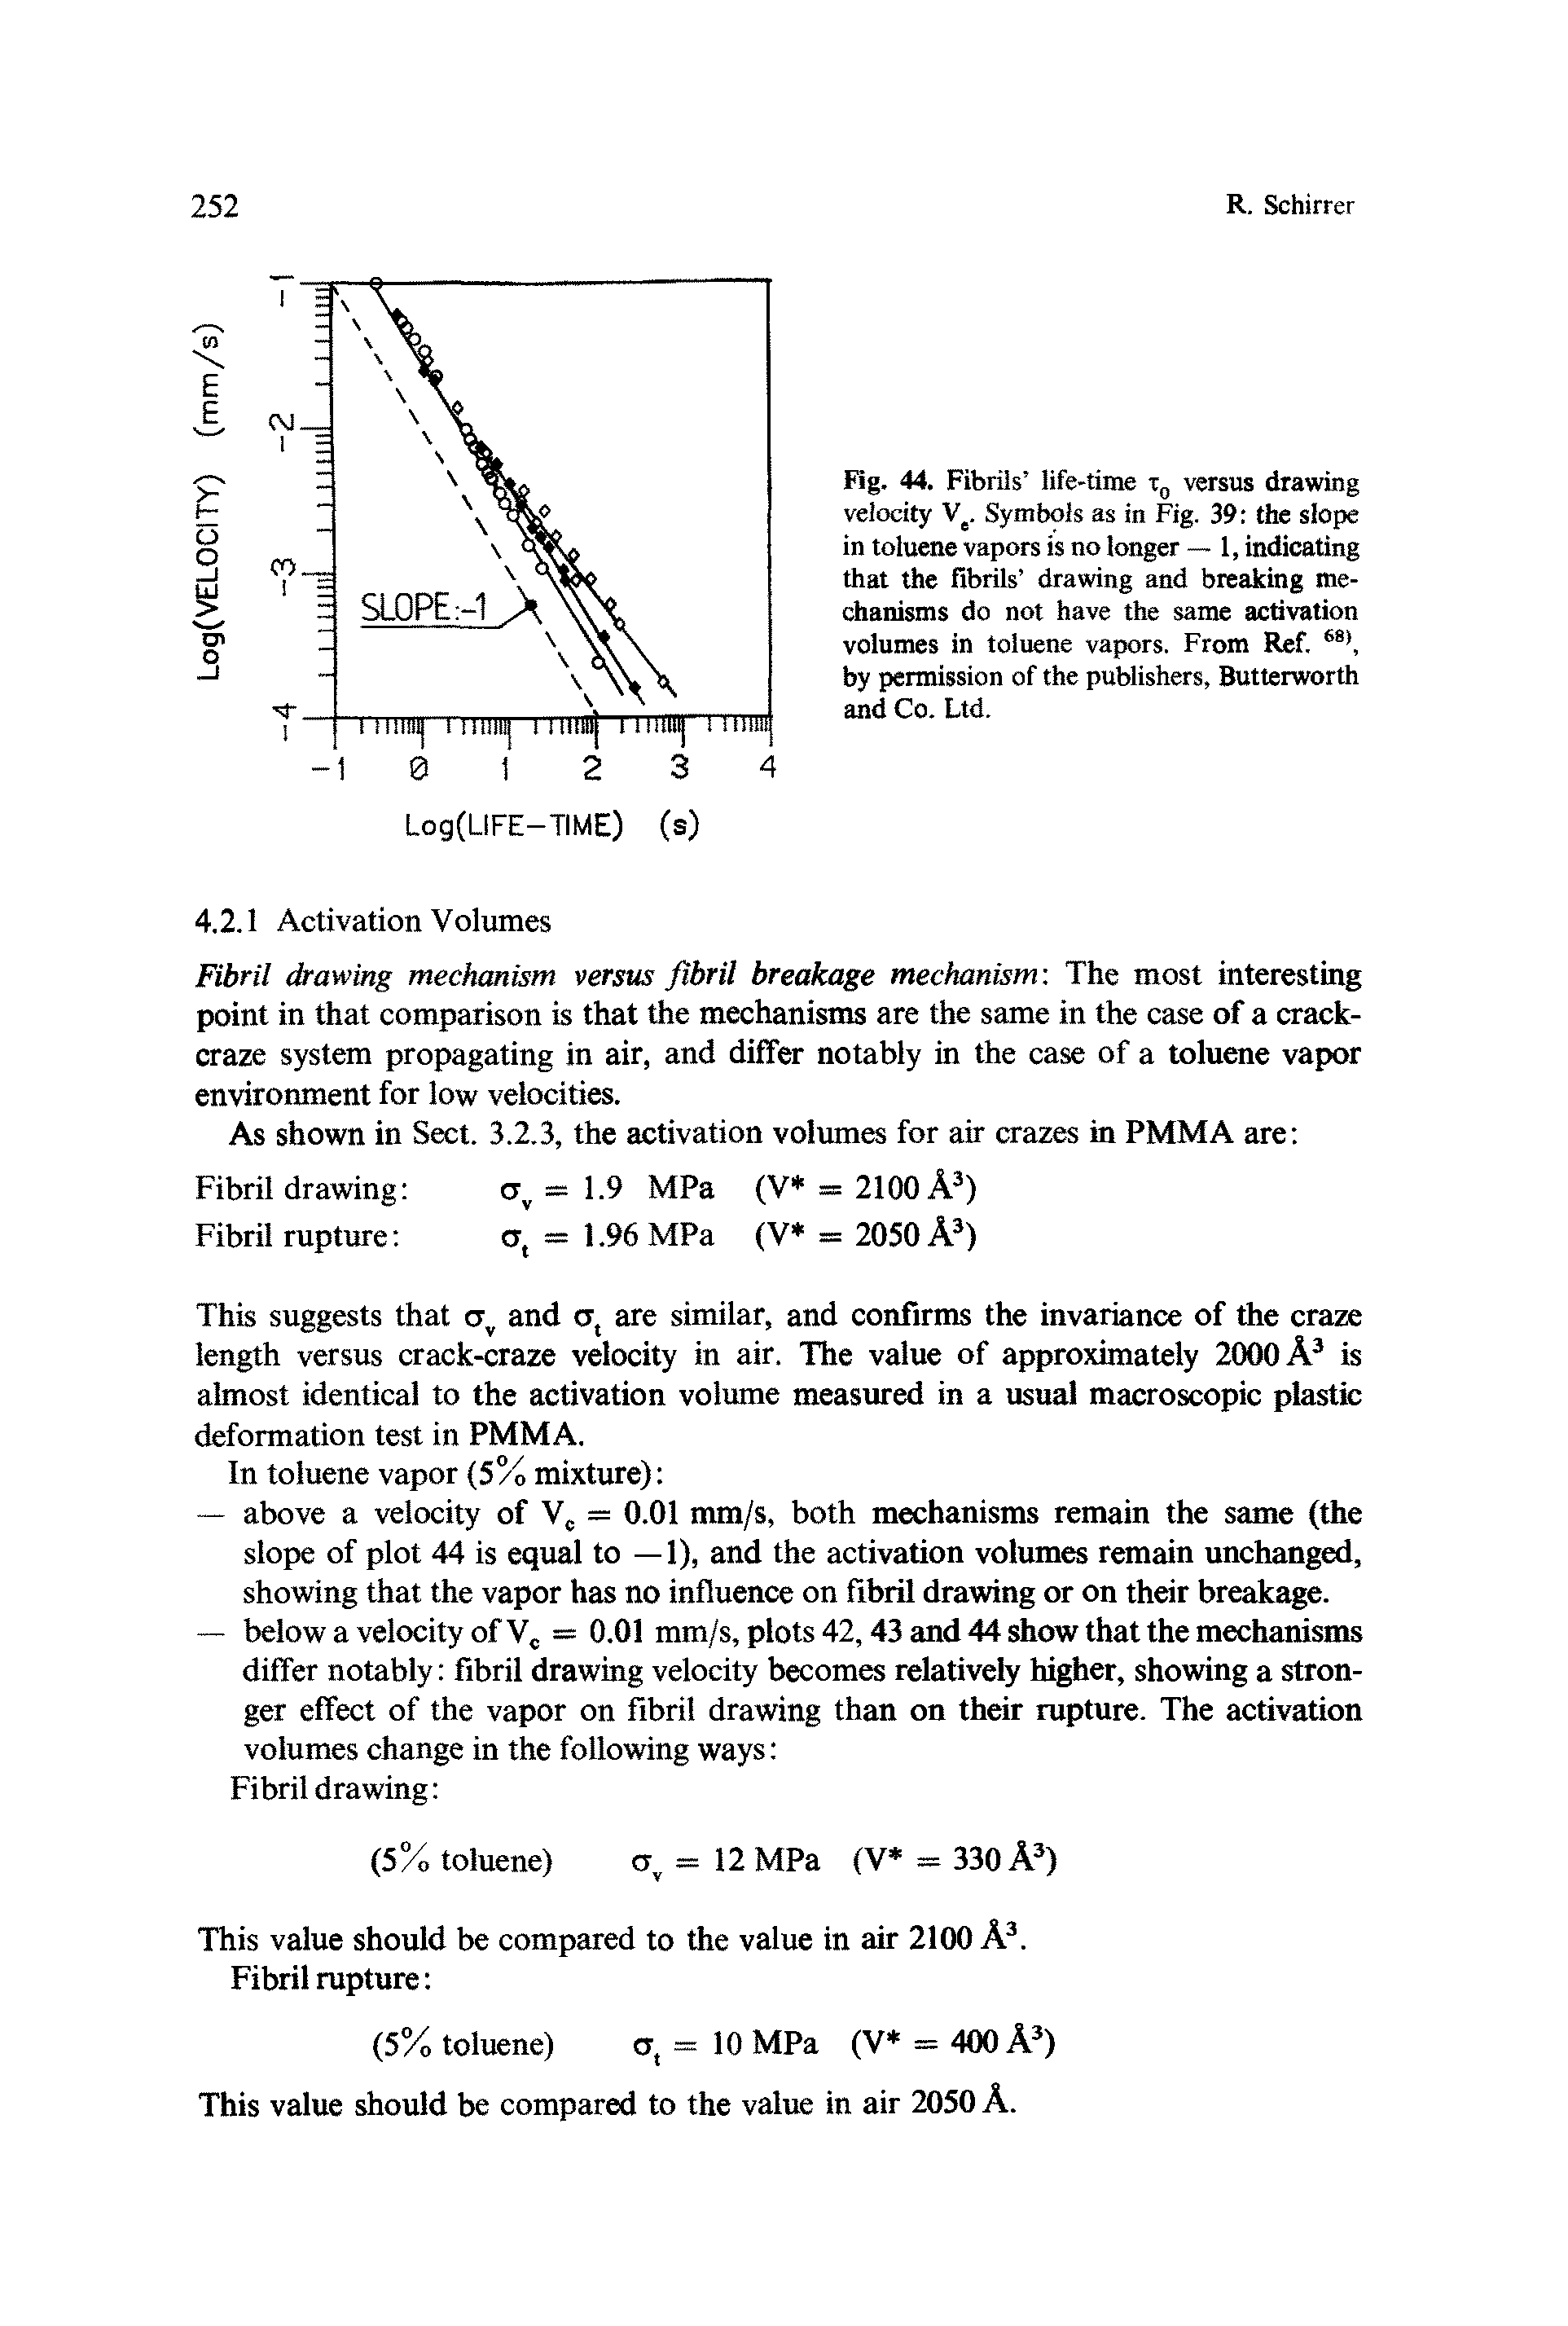 Fig. 44. FibrUs life-time versus drawing velocity V. Symbols as in Fig. 39 the slope in toluene vapors is no longer — 1, indicating that the fibrils drawing and breaking mechanisms do not have the same activation volumes in toluene vapors. From Ref. by permission of the publishers, Butterworth and Co. Ltd.